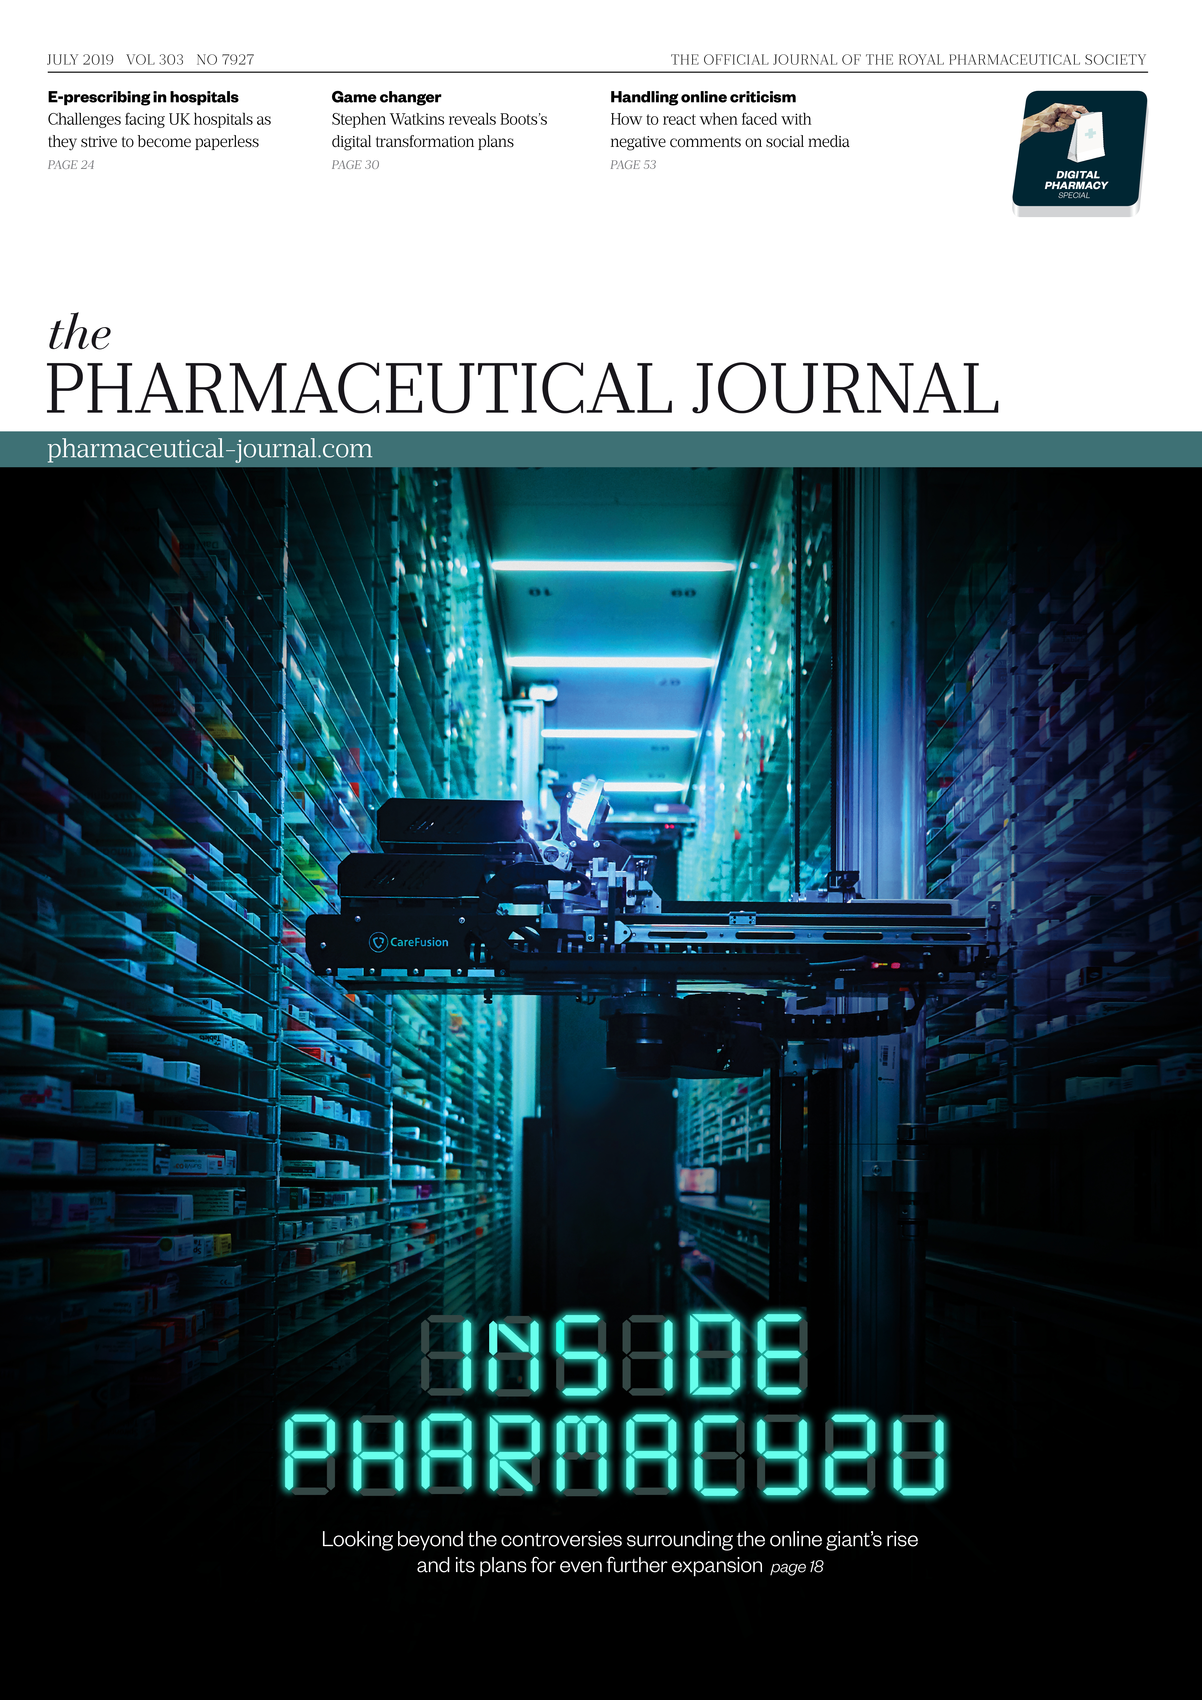 Publication issue cover for PJ, July 2019, Vol 303, No 7927